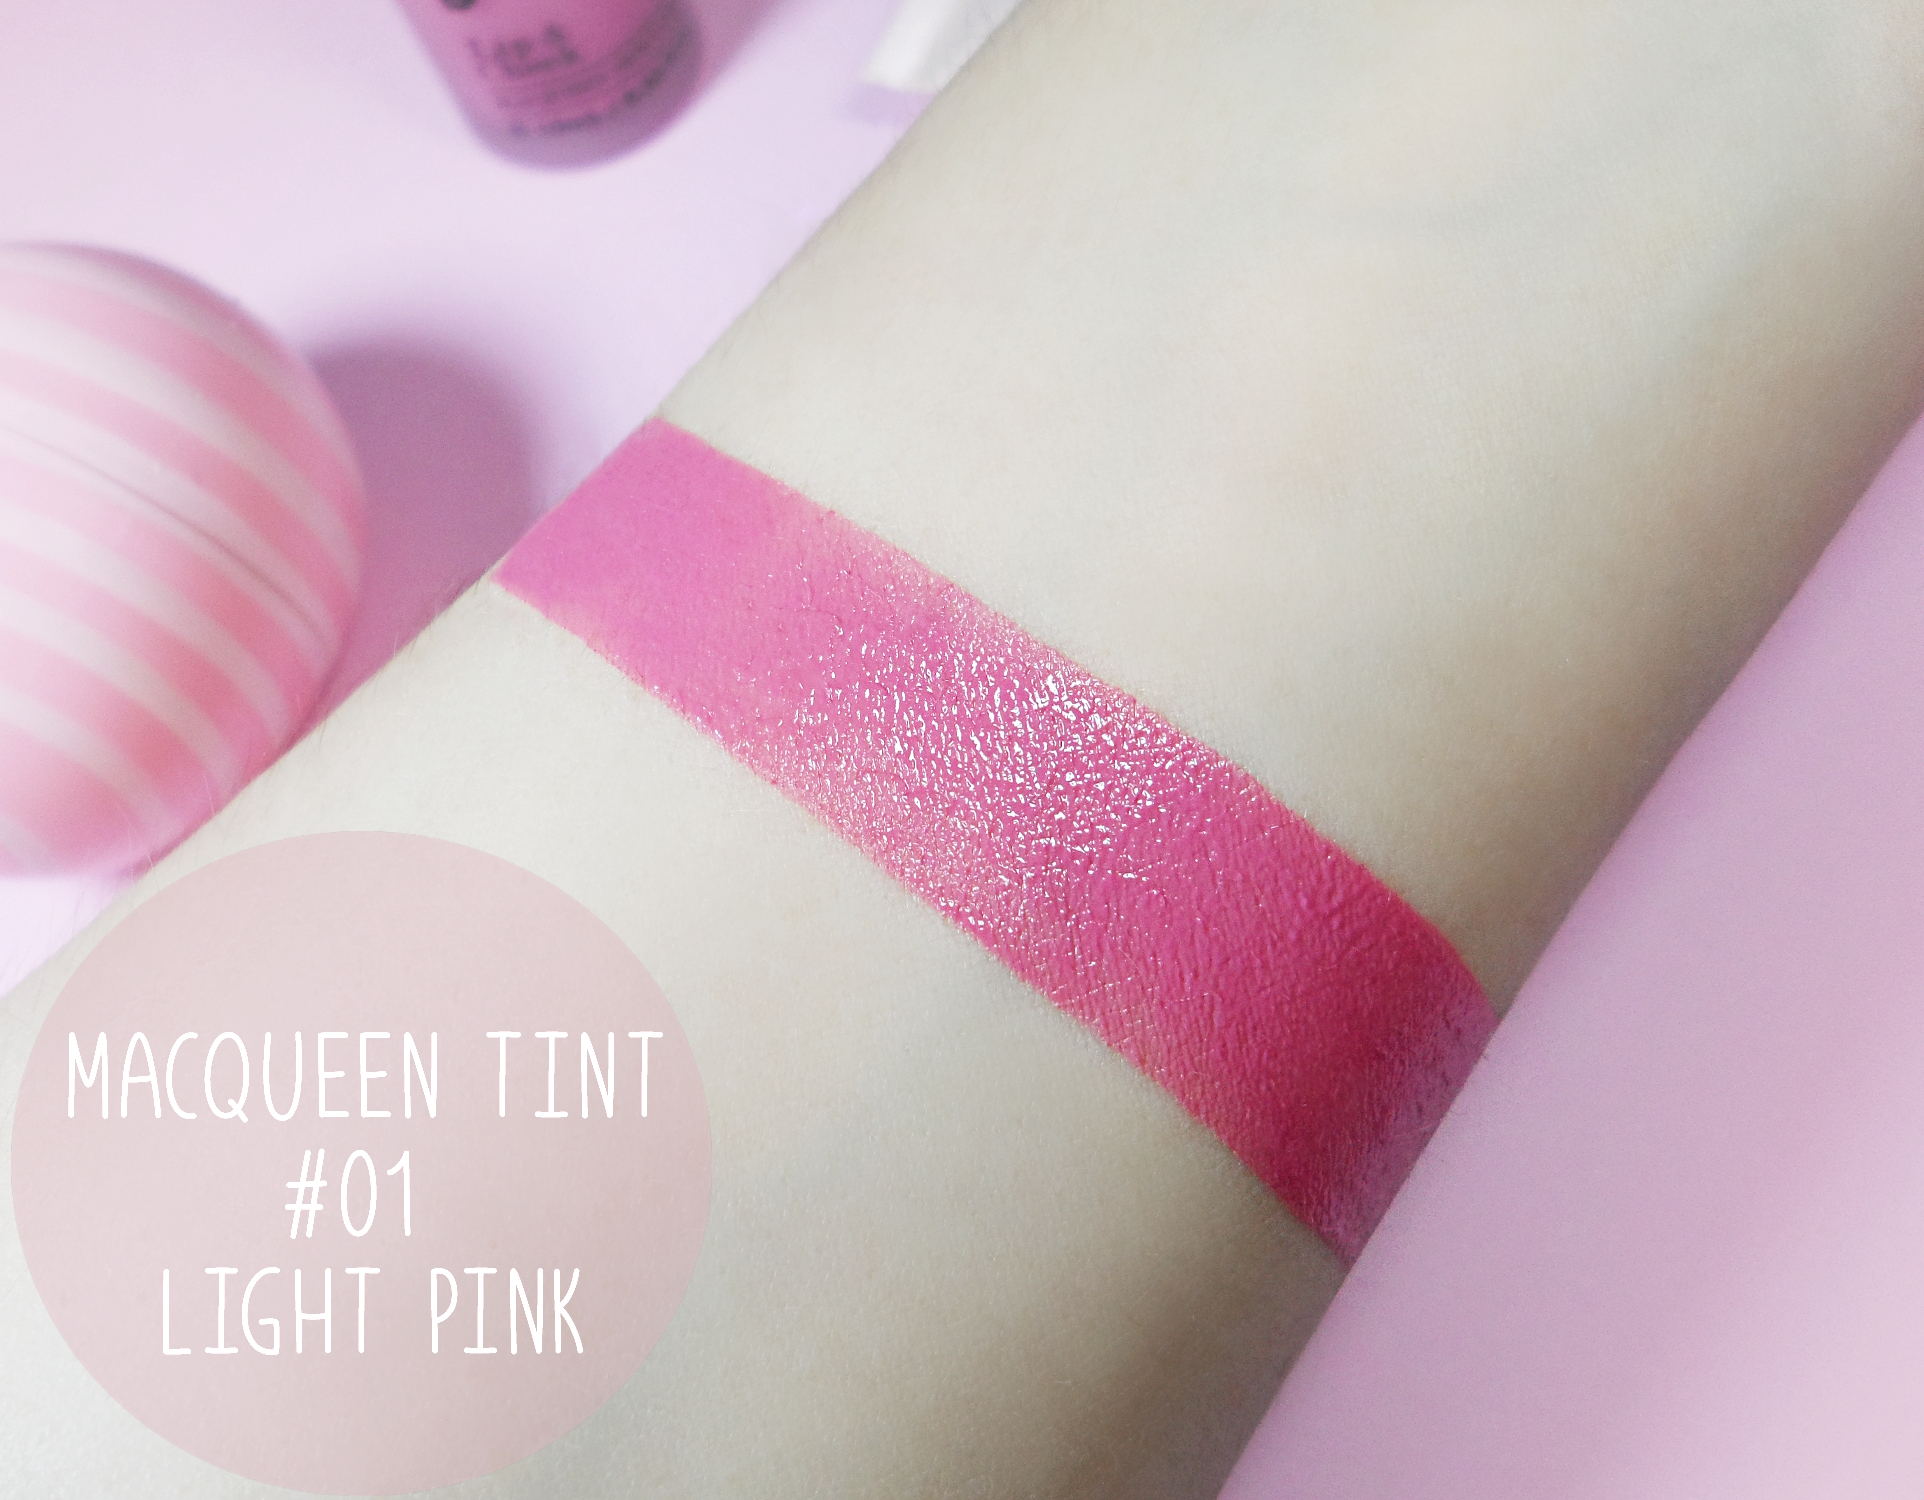 lipstick swatch of the lip and cheek MacQueen tint on a ligth skin